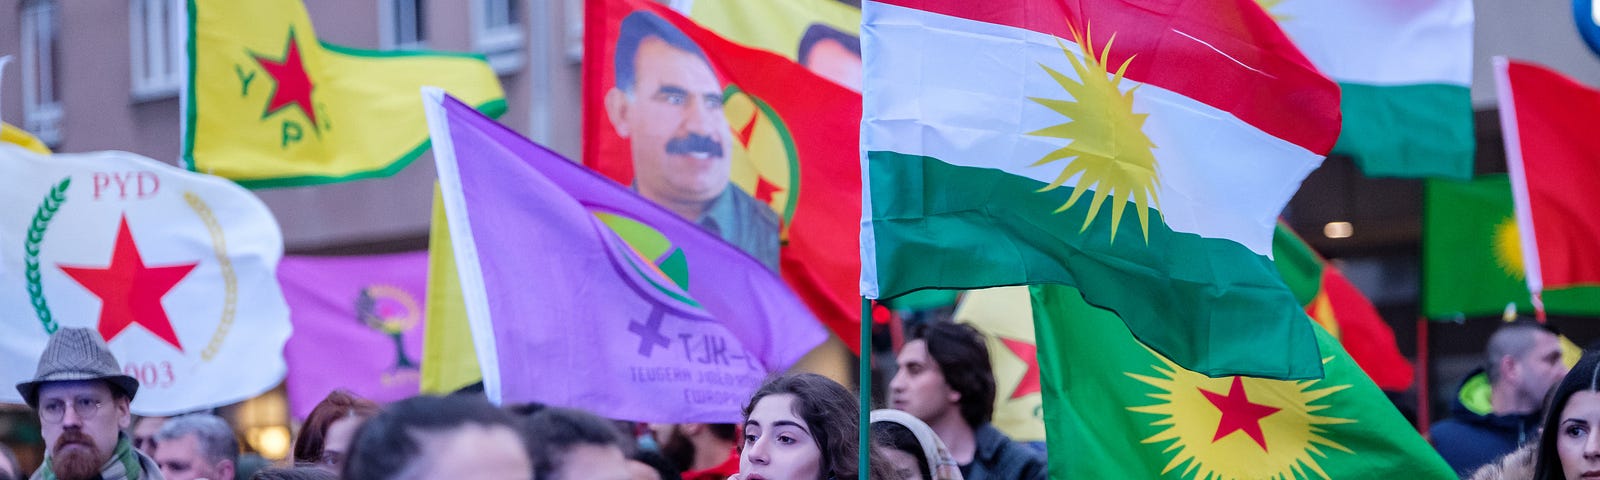 Thousands of people with flags protesting against the Turkish military forces’ attacks on Kurdish fighters and civilians in northern Syria. Photo by Magnus Persson/SOPA Images/LightRocket via Getty Images.